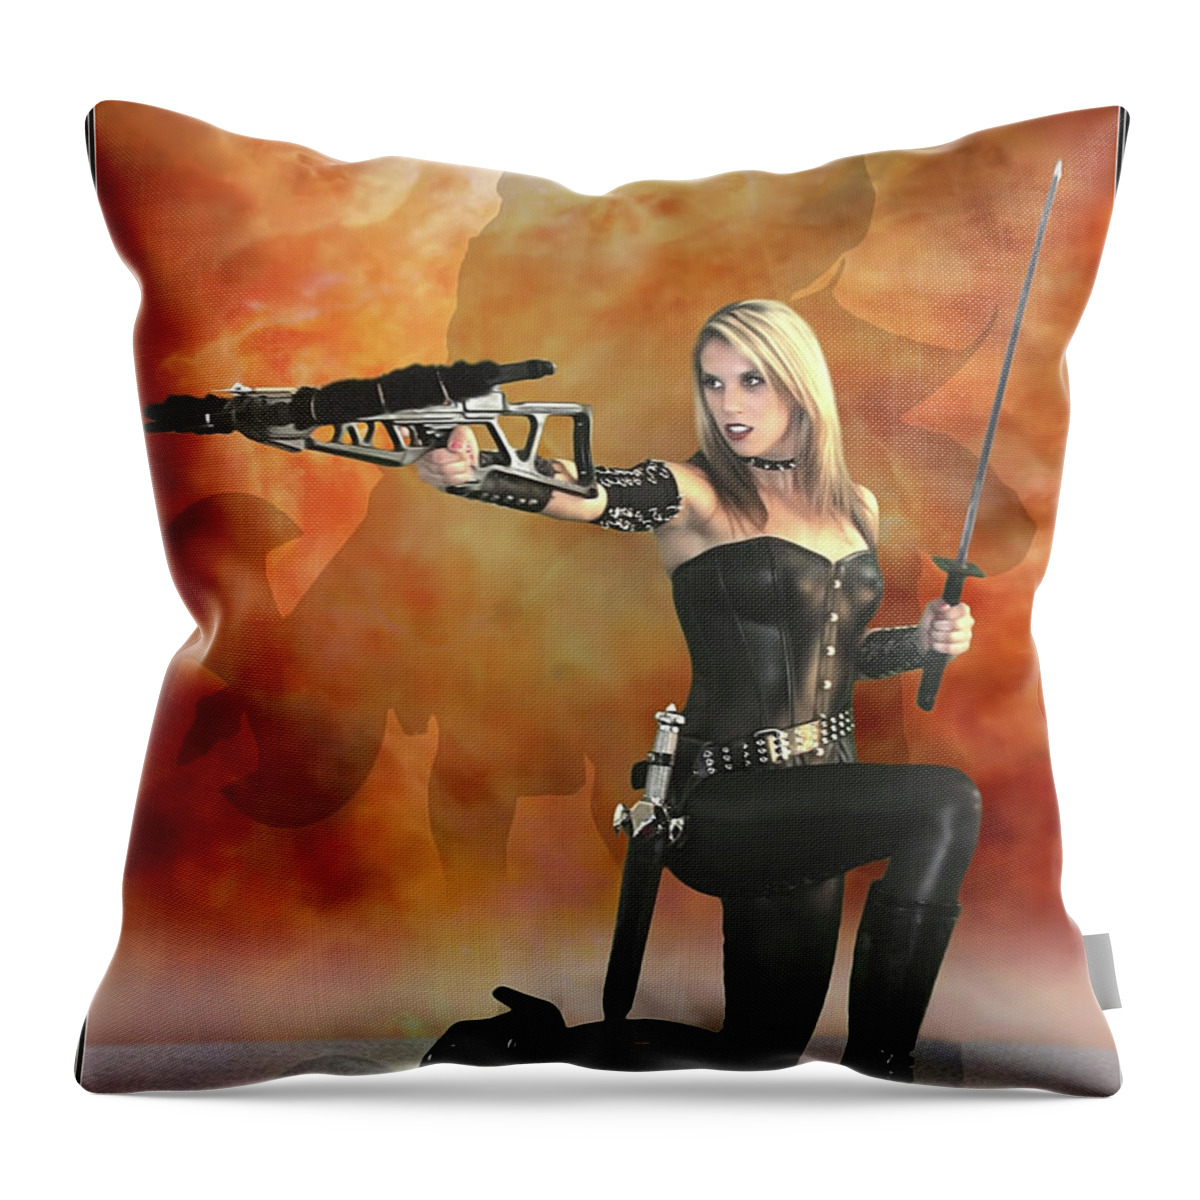 Crossbow Throw Pillow featuring the photograph Crossbow Heroine by Jon Volden